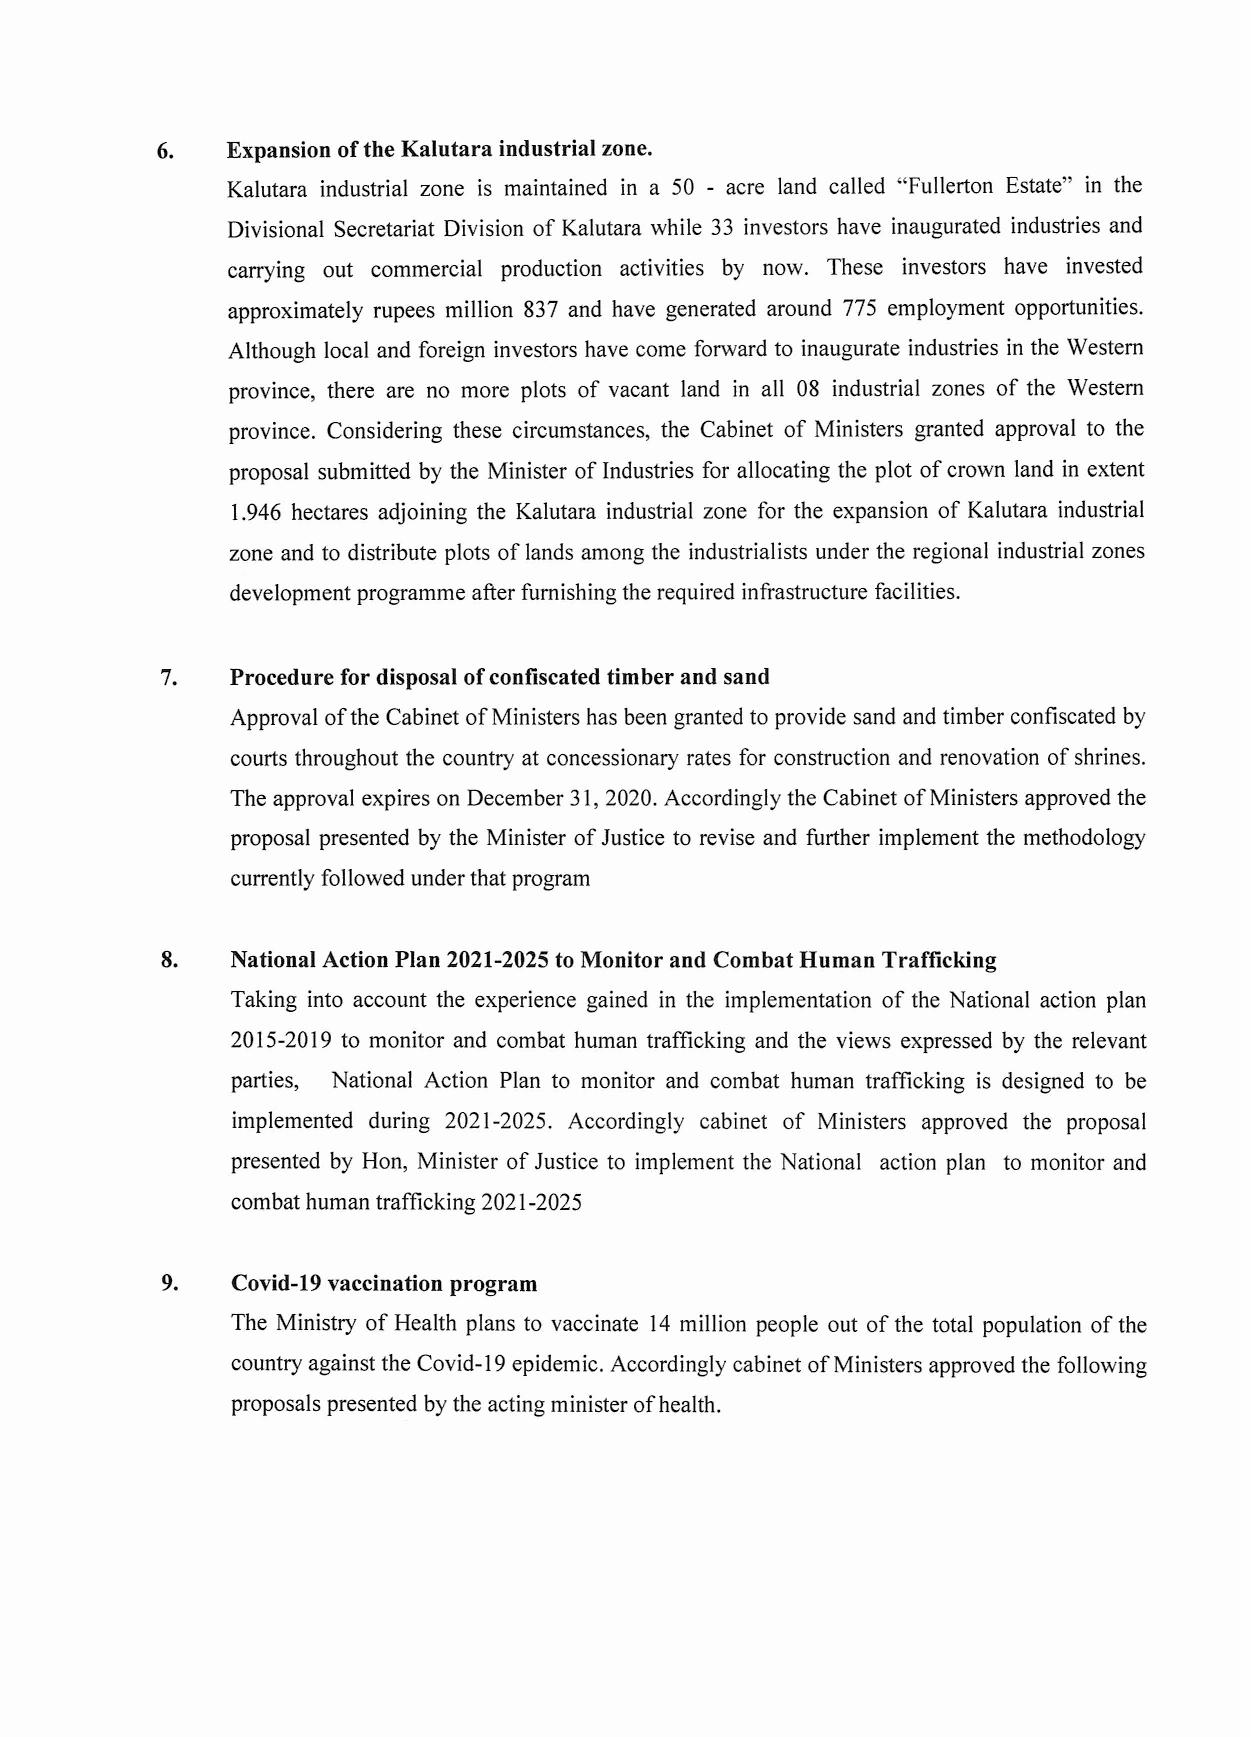 Cabinet Decision on 22.02.2021 Englihs page 003